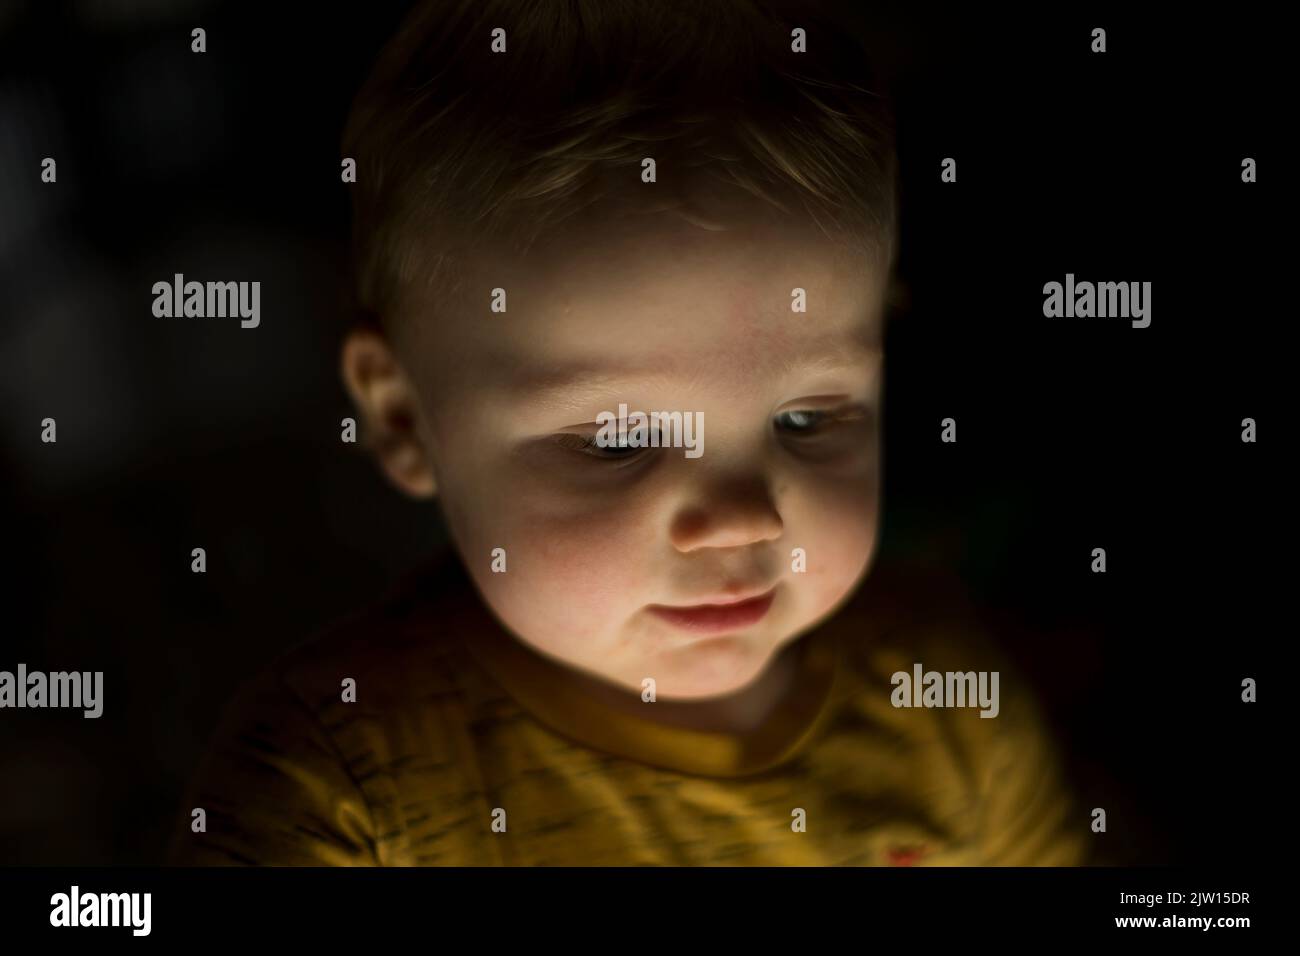 Blonde haired, blue eyed toddler boy looks down with a light shining upwards. Stock Photo